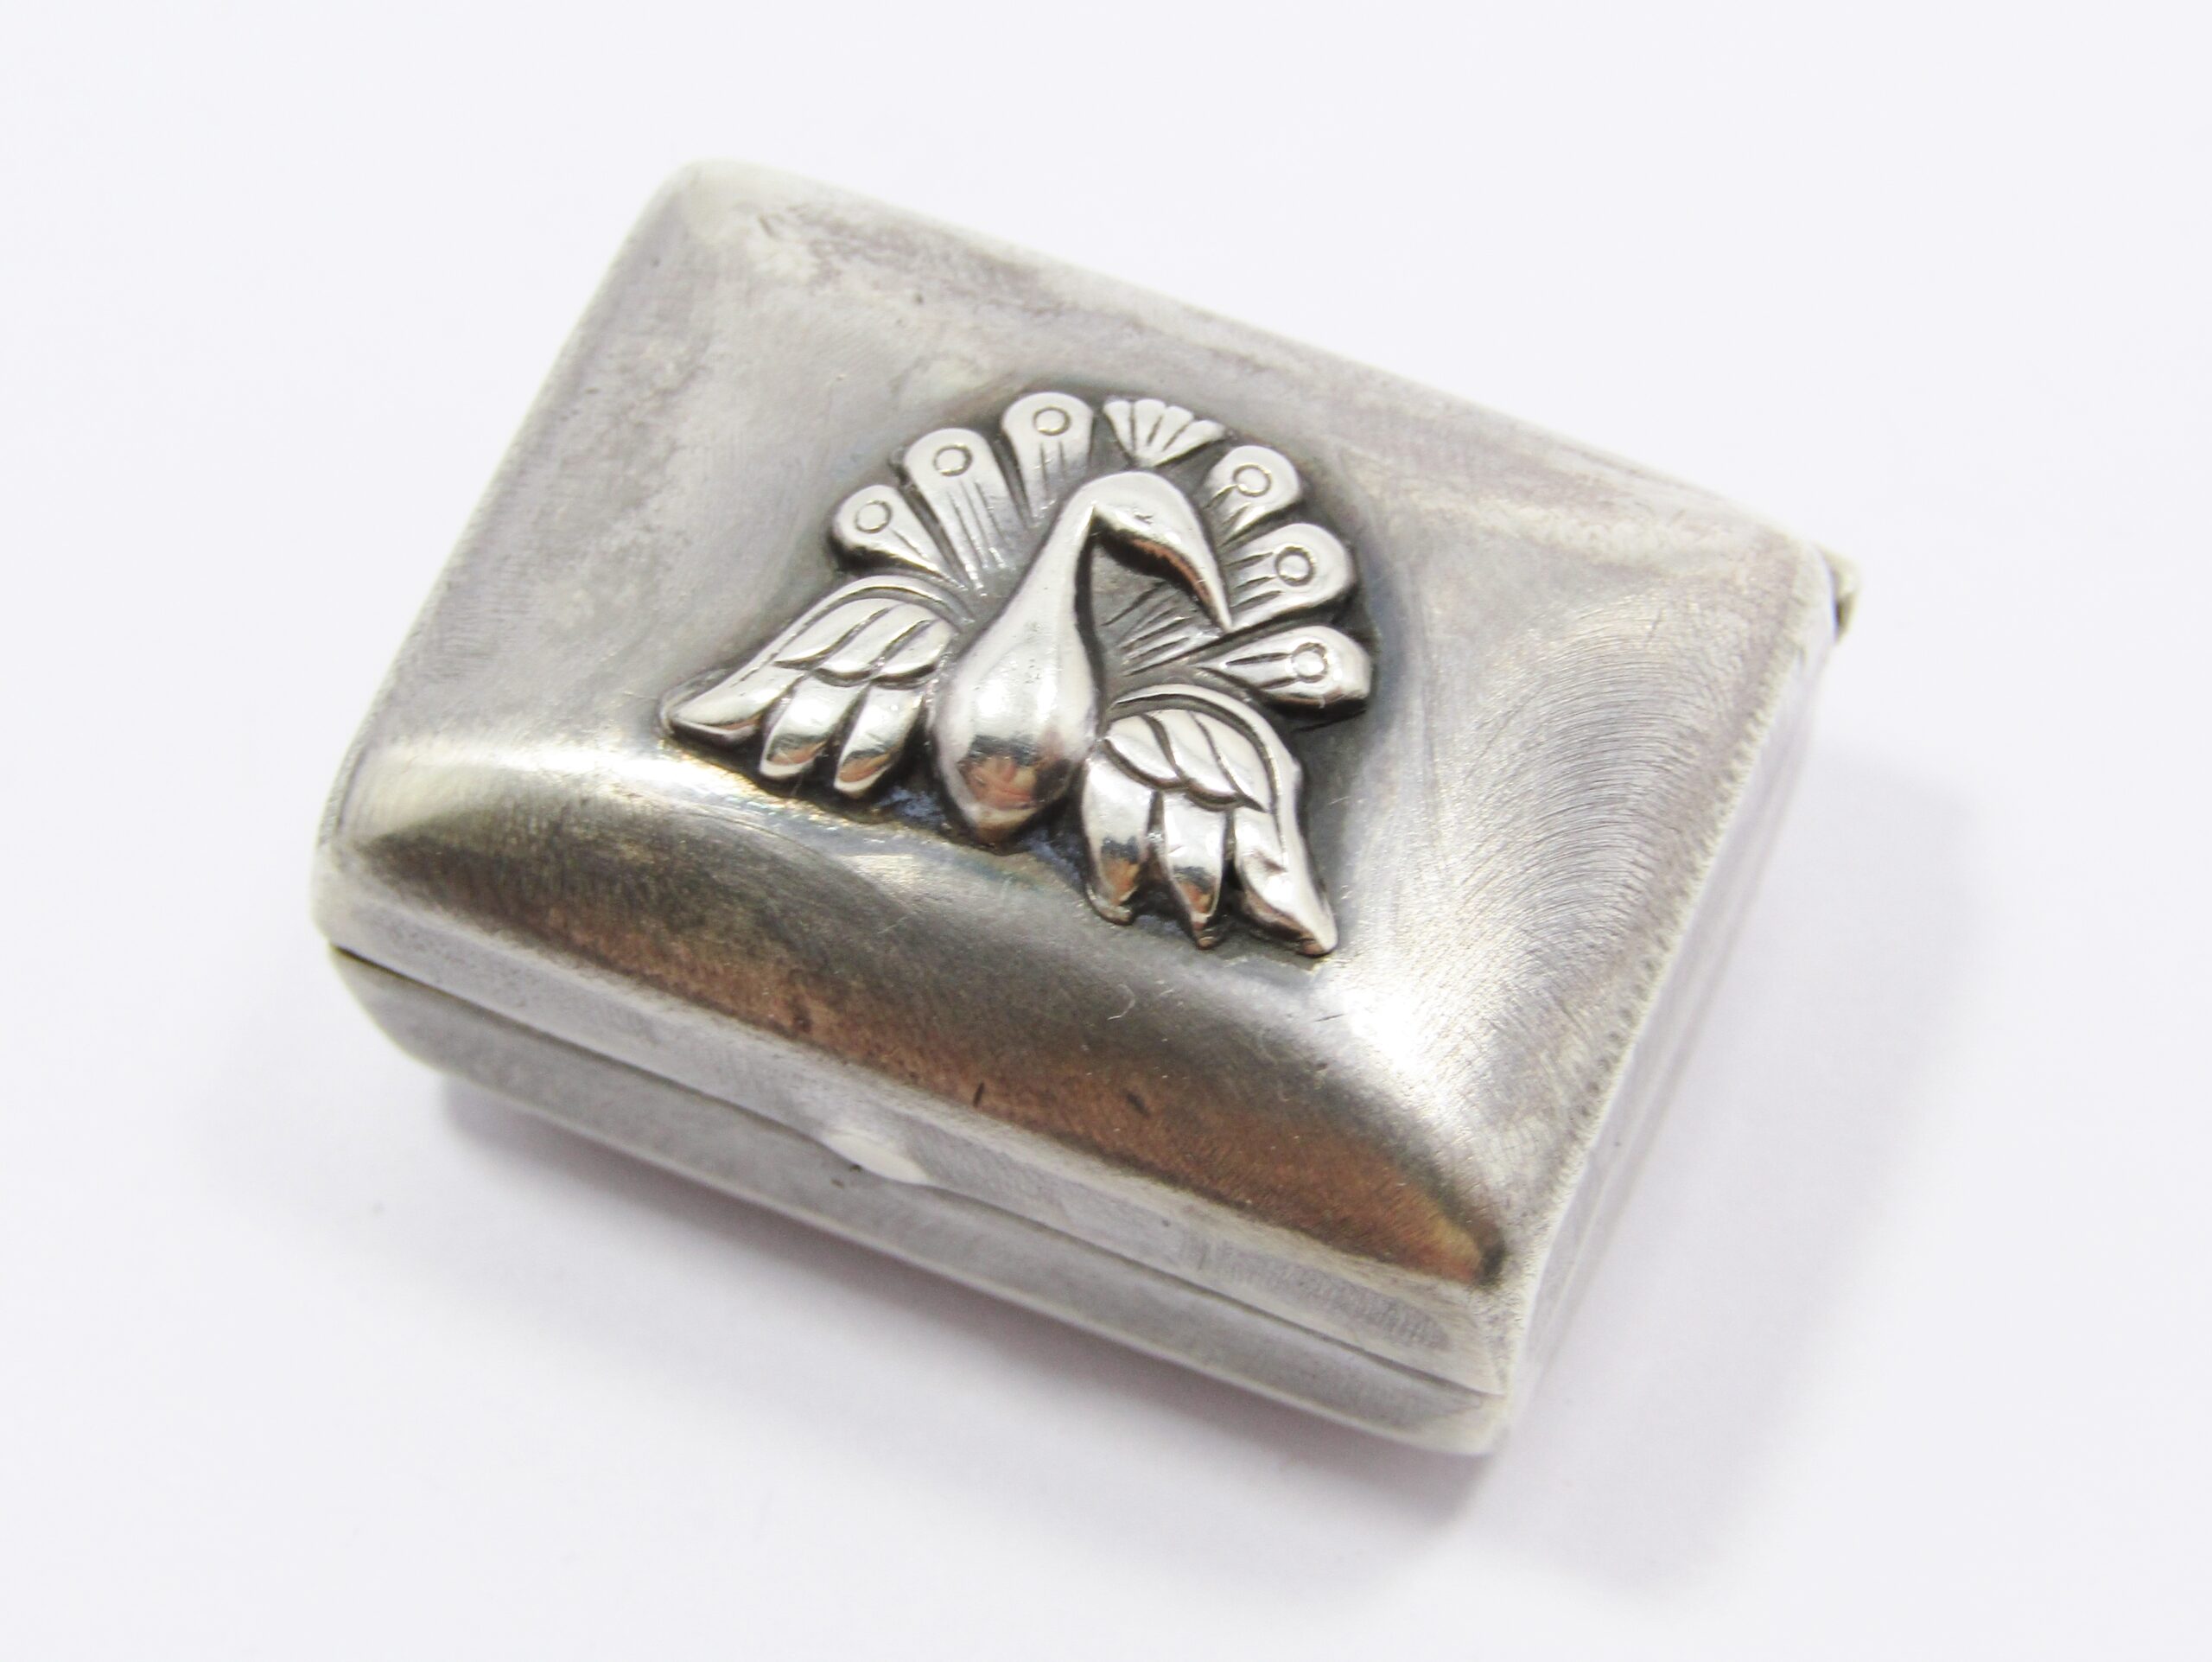 A Gorgeous Vintage Peacock Design Pill Box In 800 Silver